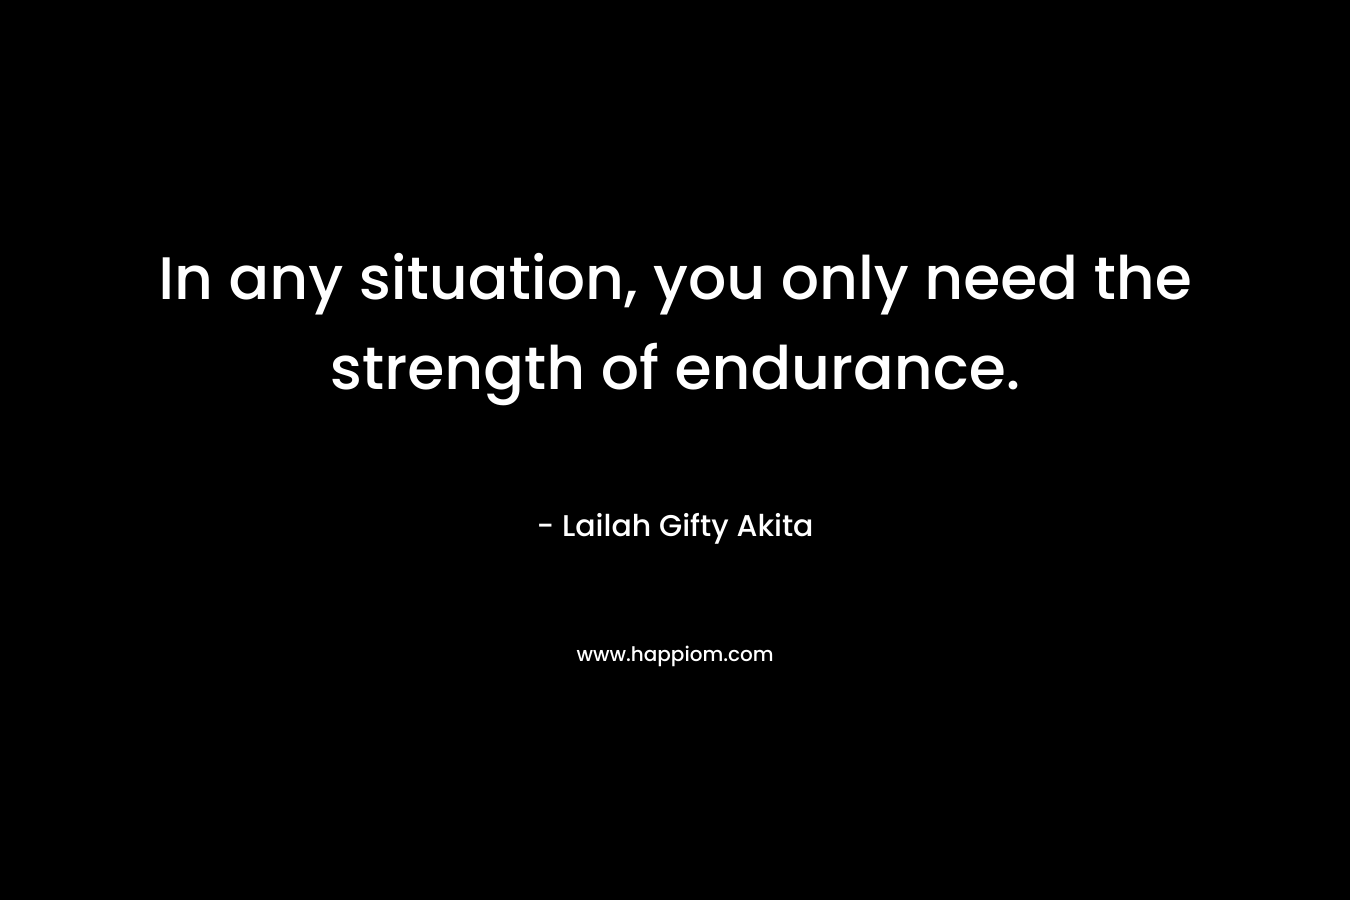 In any situation, you only need the strength of endurance.